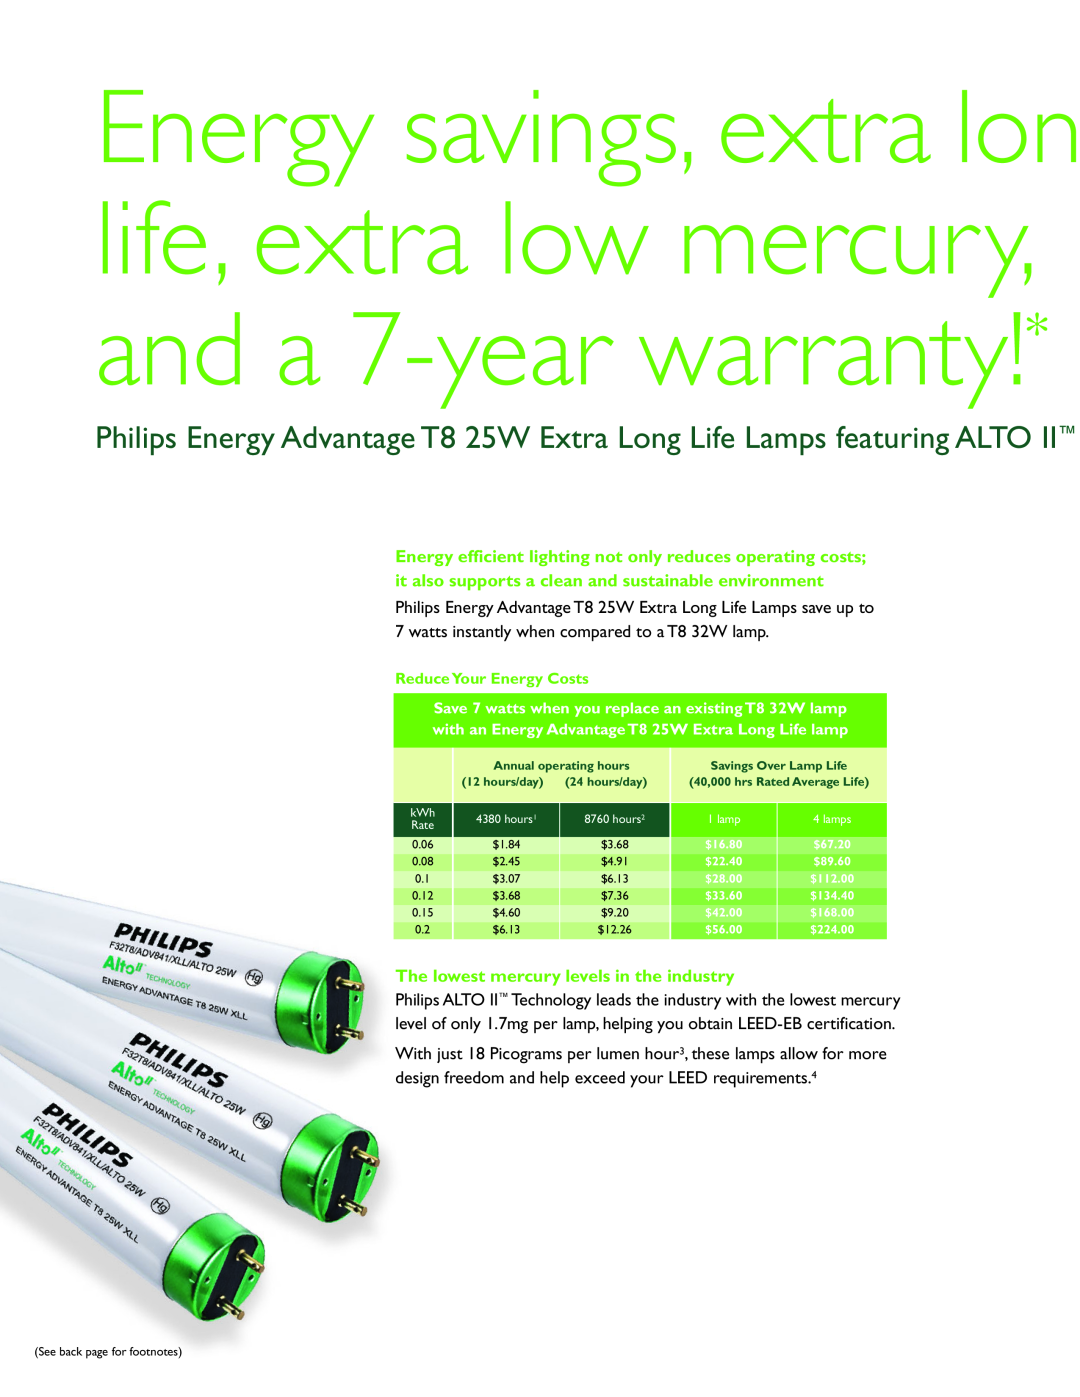 Philips P-6018 manual The lowest mercury levels in the industry, ReduceYour Energy Costs 